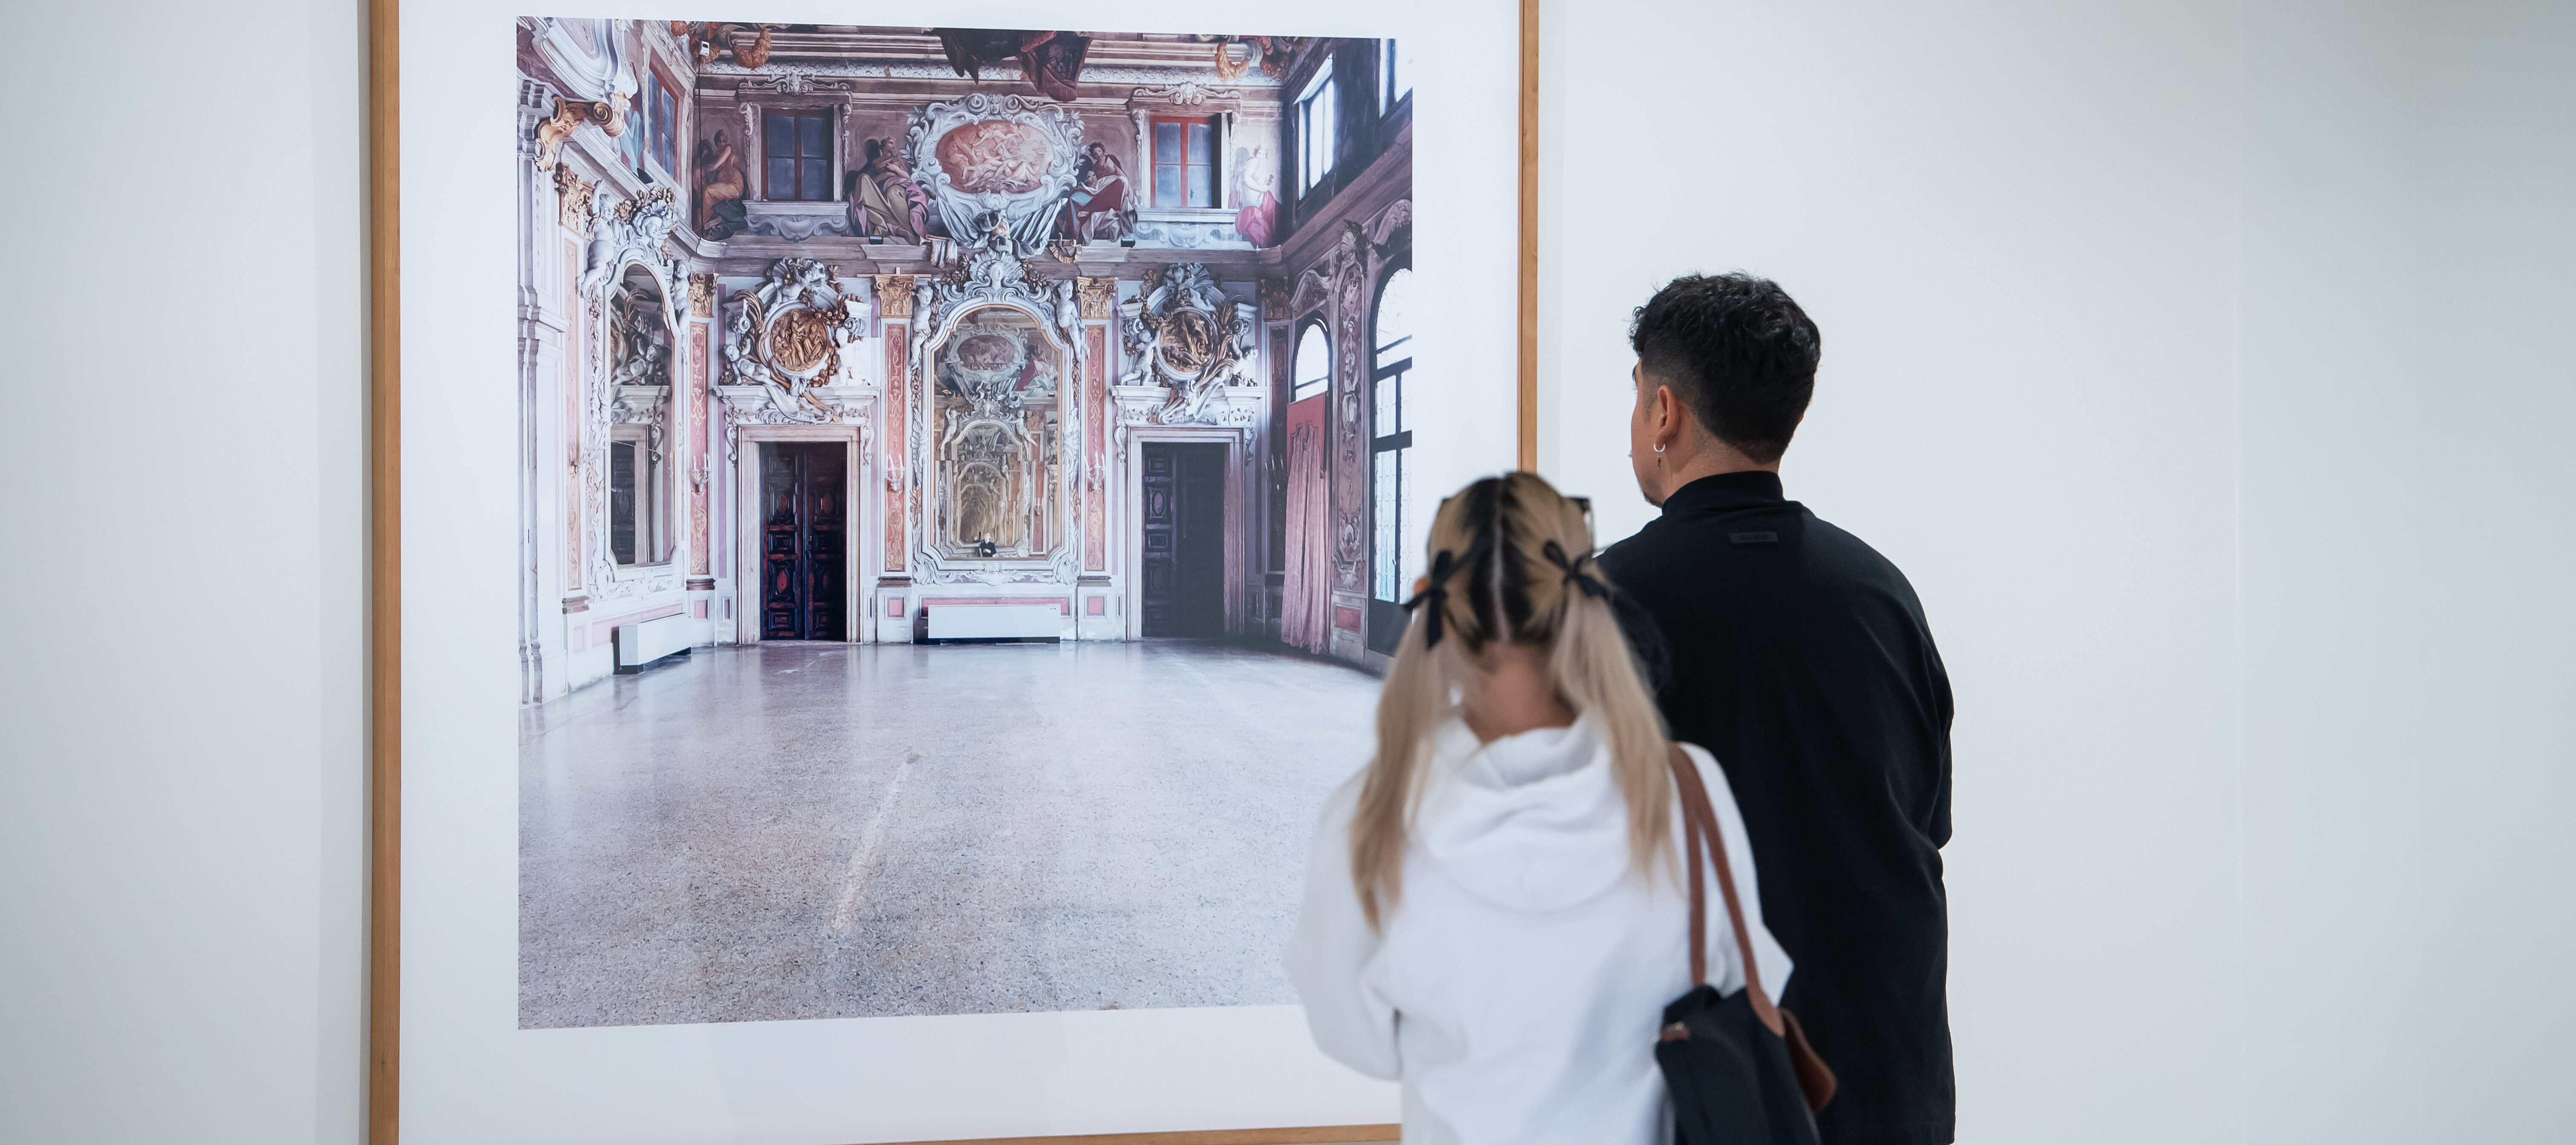 Two museum visitors observe a large artwork on the wall.